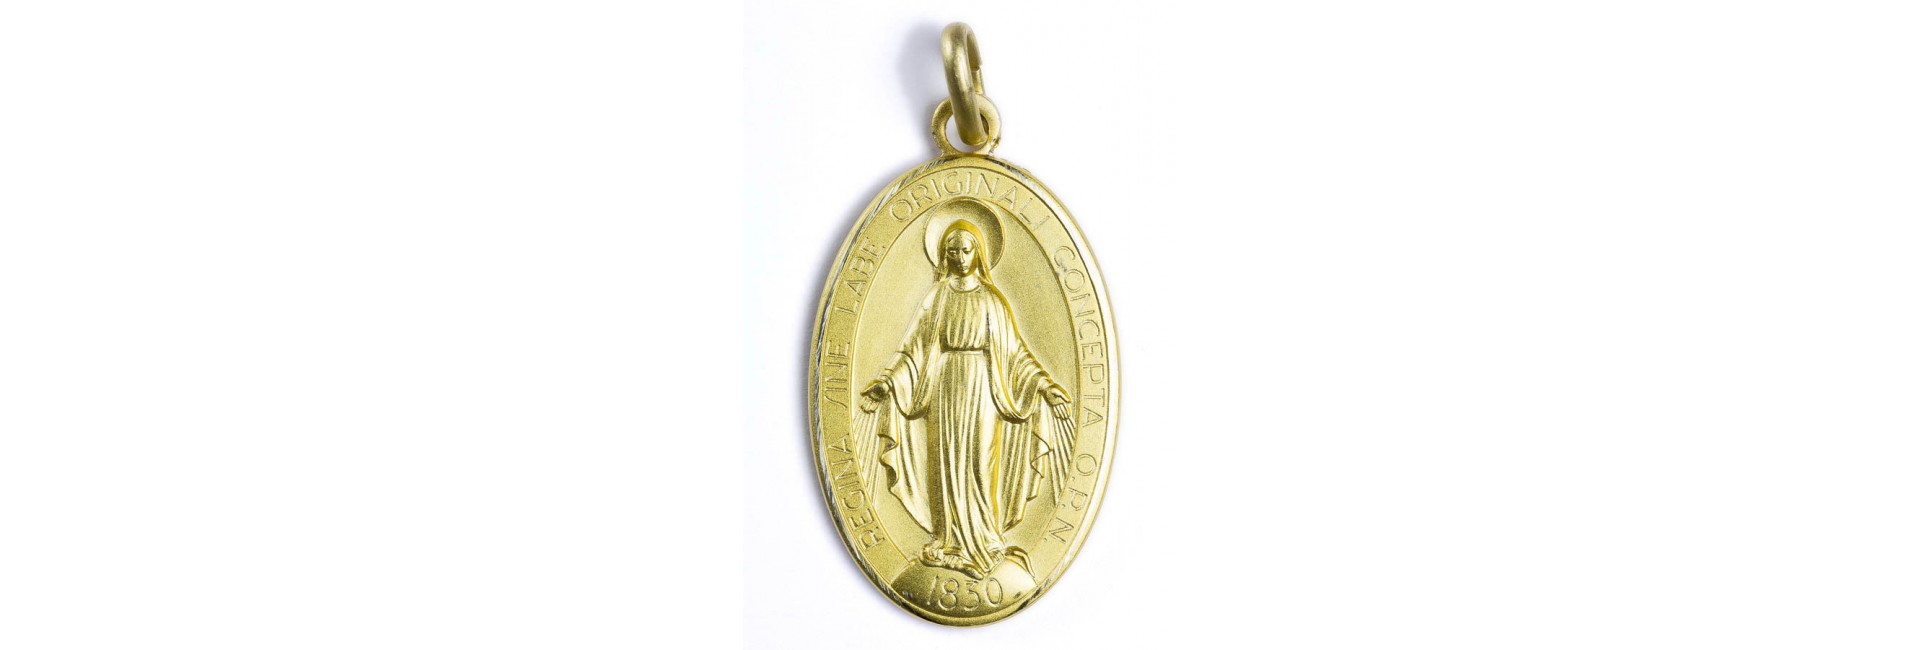 Miraculous gold plated medal